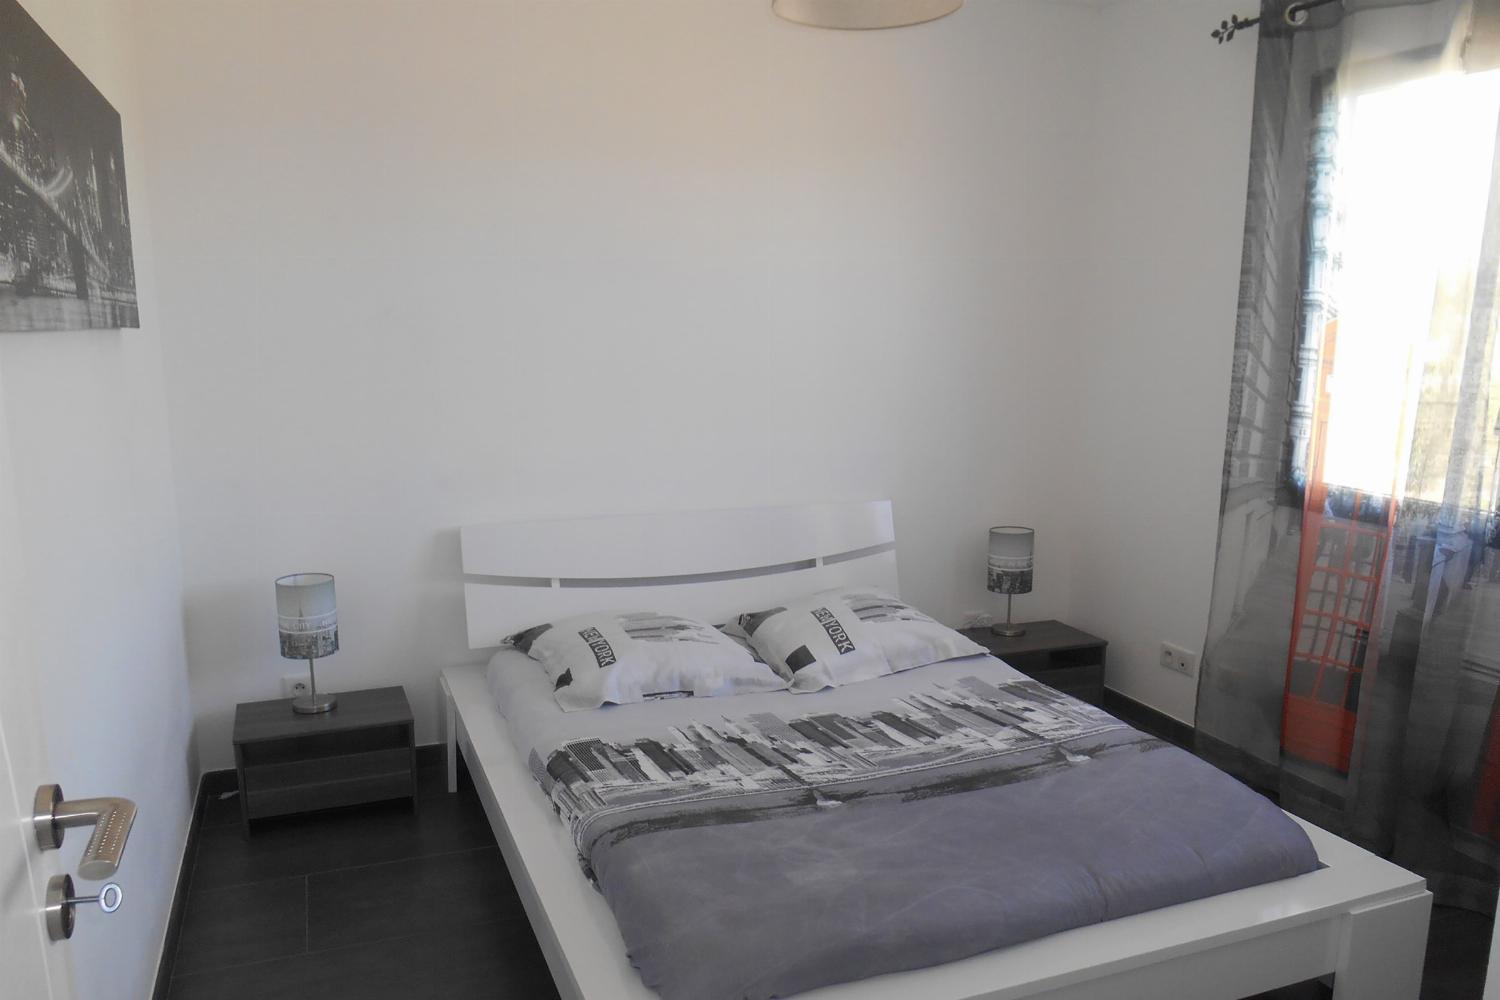 Bedroom | Rental accommodation in the South of France